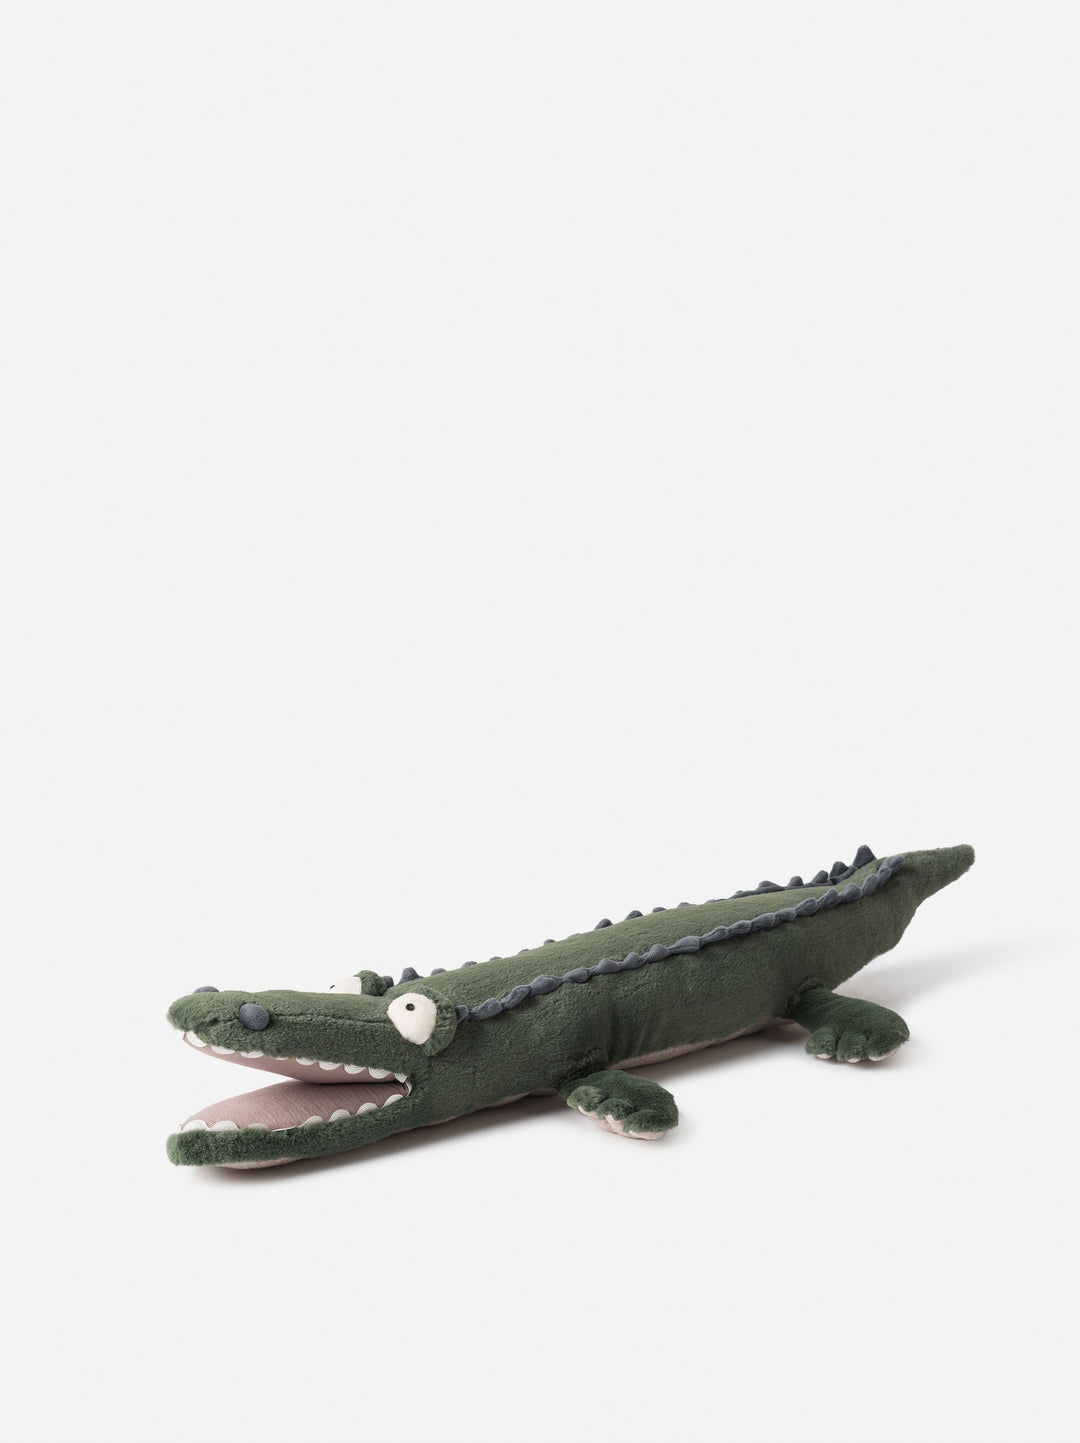 Betsy the Croc